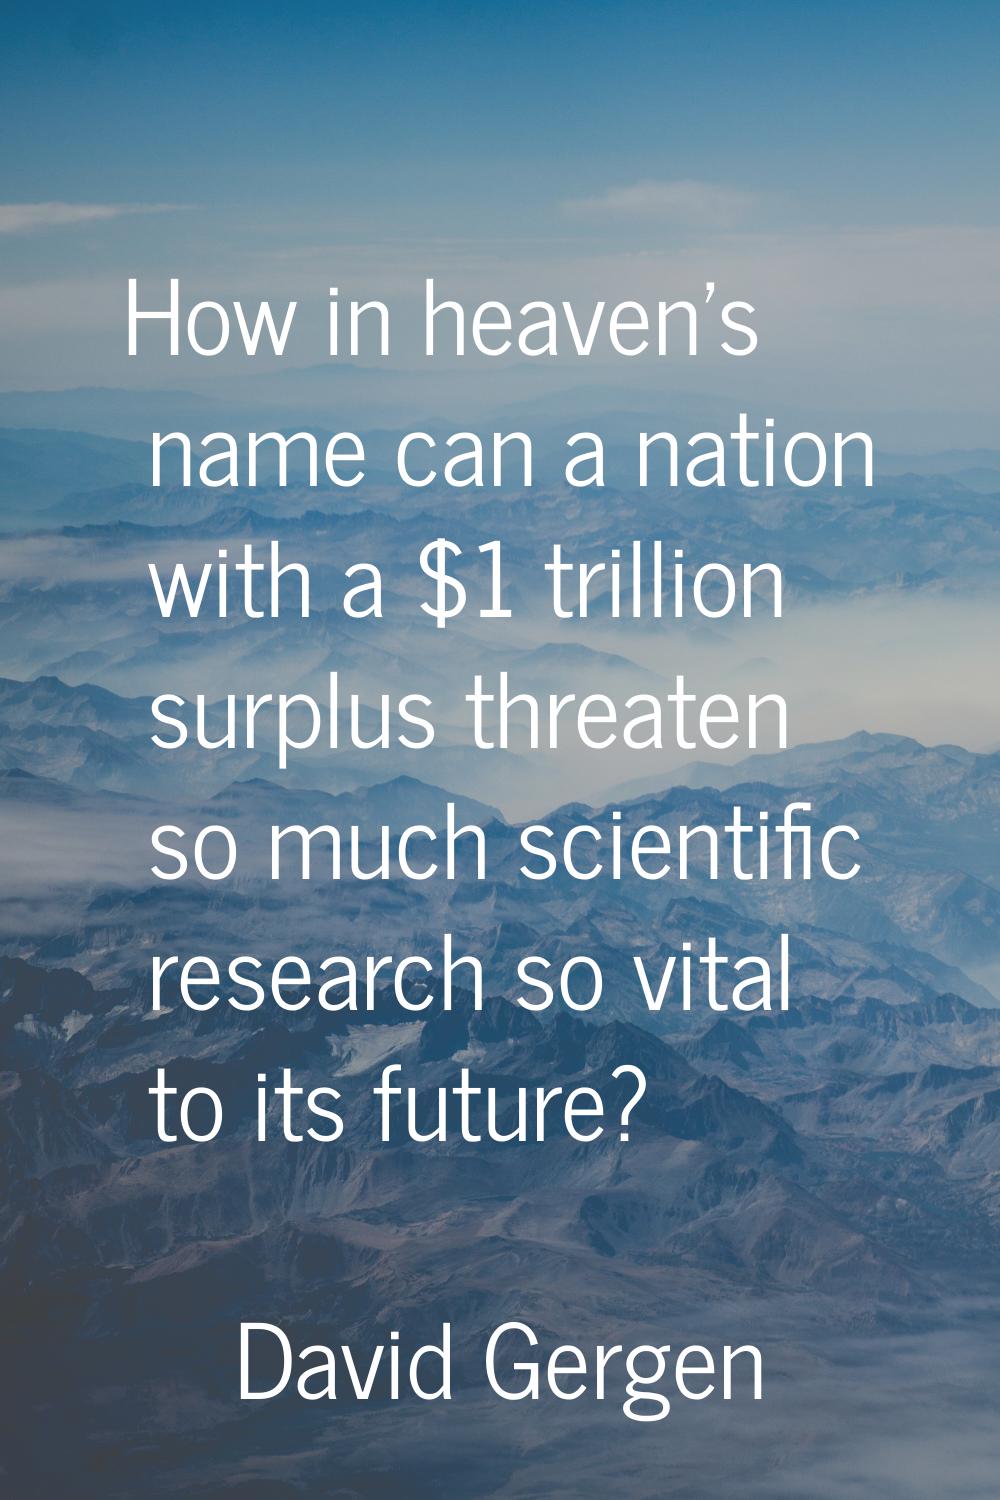 How in heaven's name can a nation with a $1 trillion surplus threaten so much scientific research s